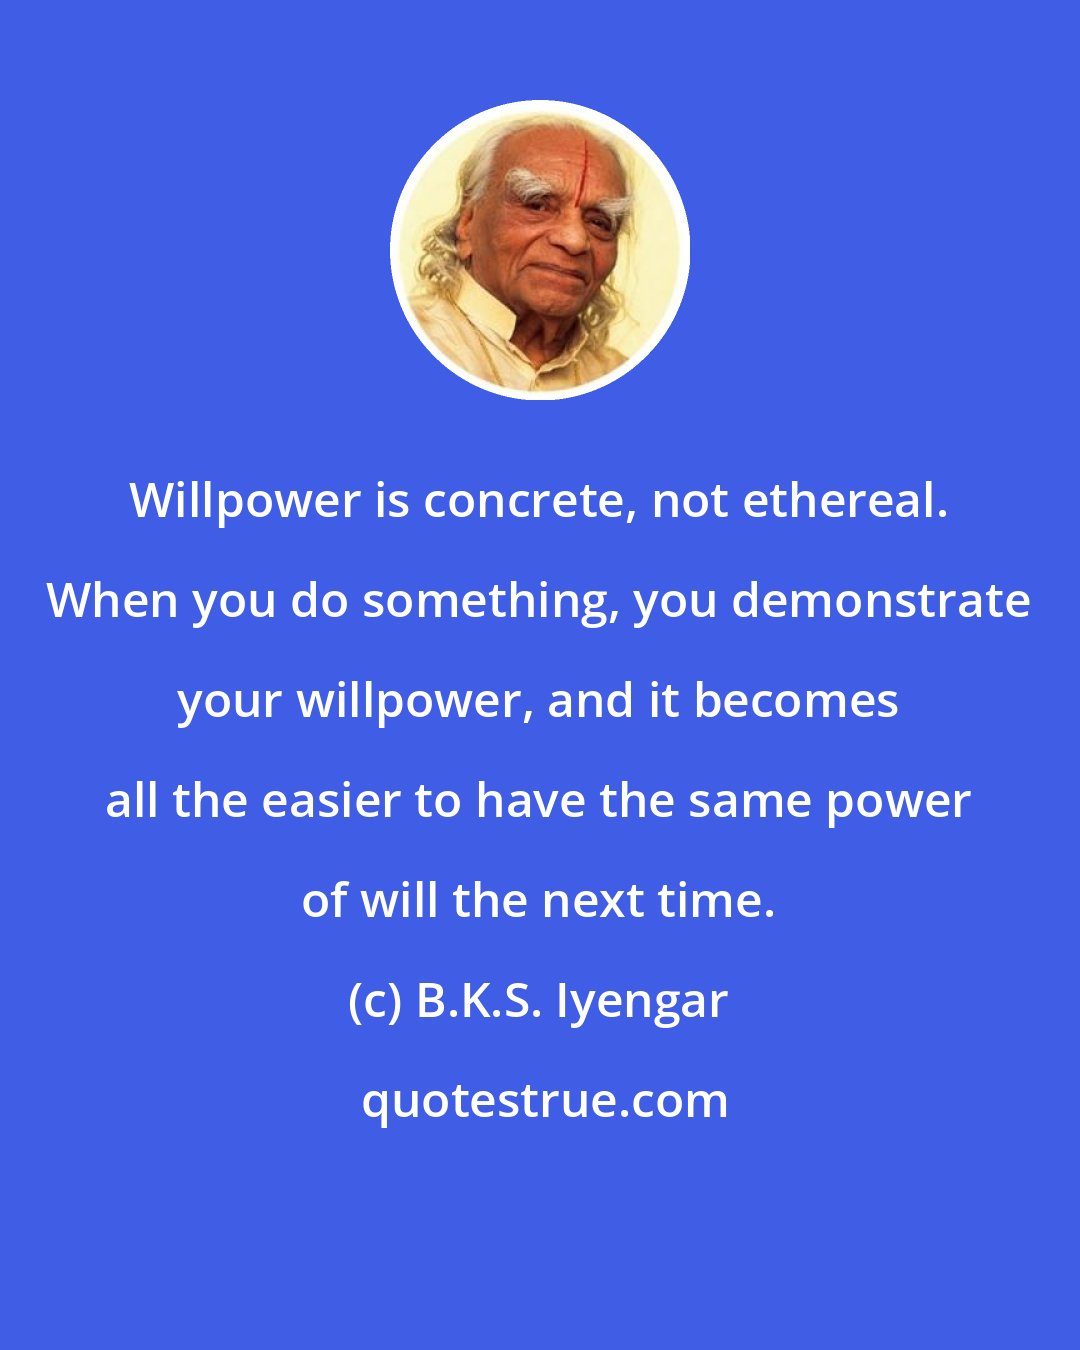 B.K.S. Iyengar: Willpower is concrete, not ethereal. When you do something, you demonstrate your willpower, and it becomes all the easier to have the same power of will the next time.